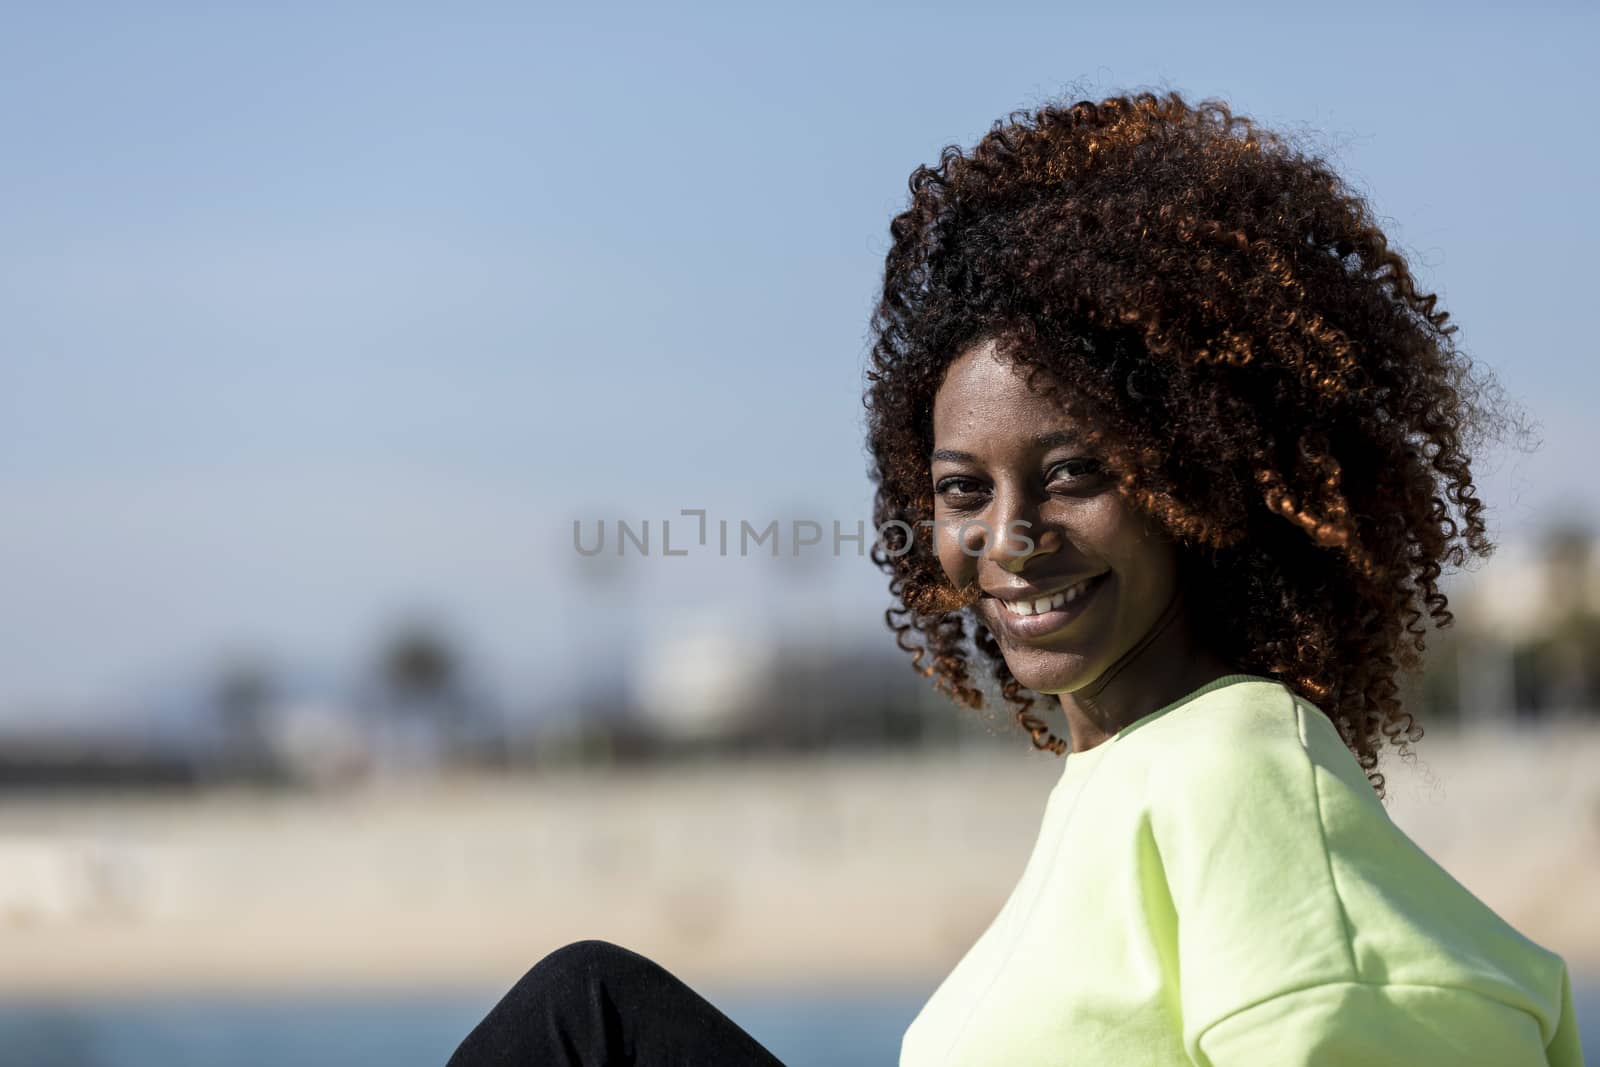 Portrait of a Beautiful afro american woman sitting on shore in a sunny day